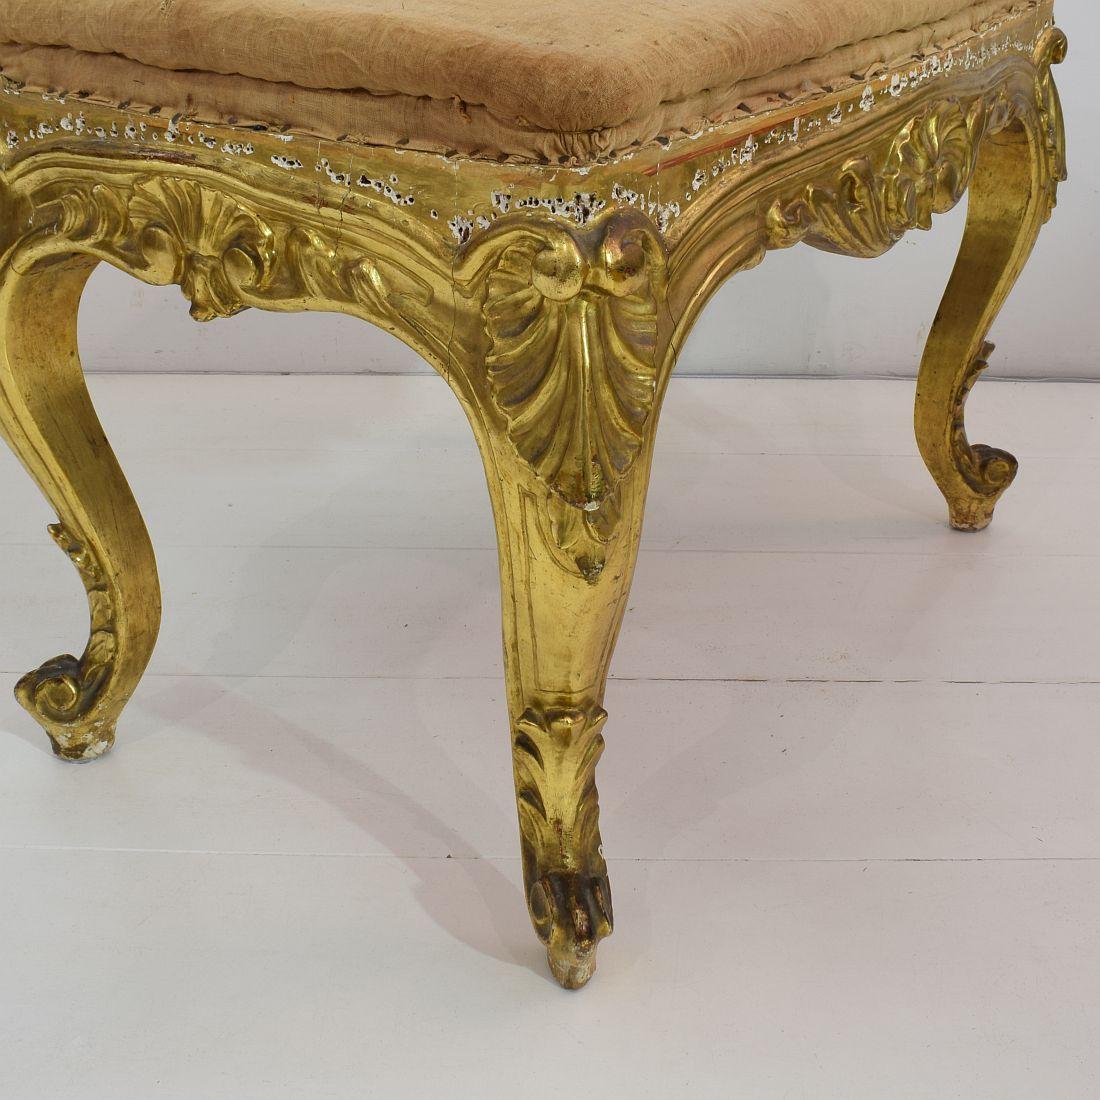 19th Century Spanish Gilded Louis XVI Style Carved Stool or Tabouret 8